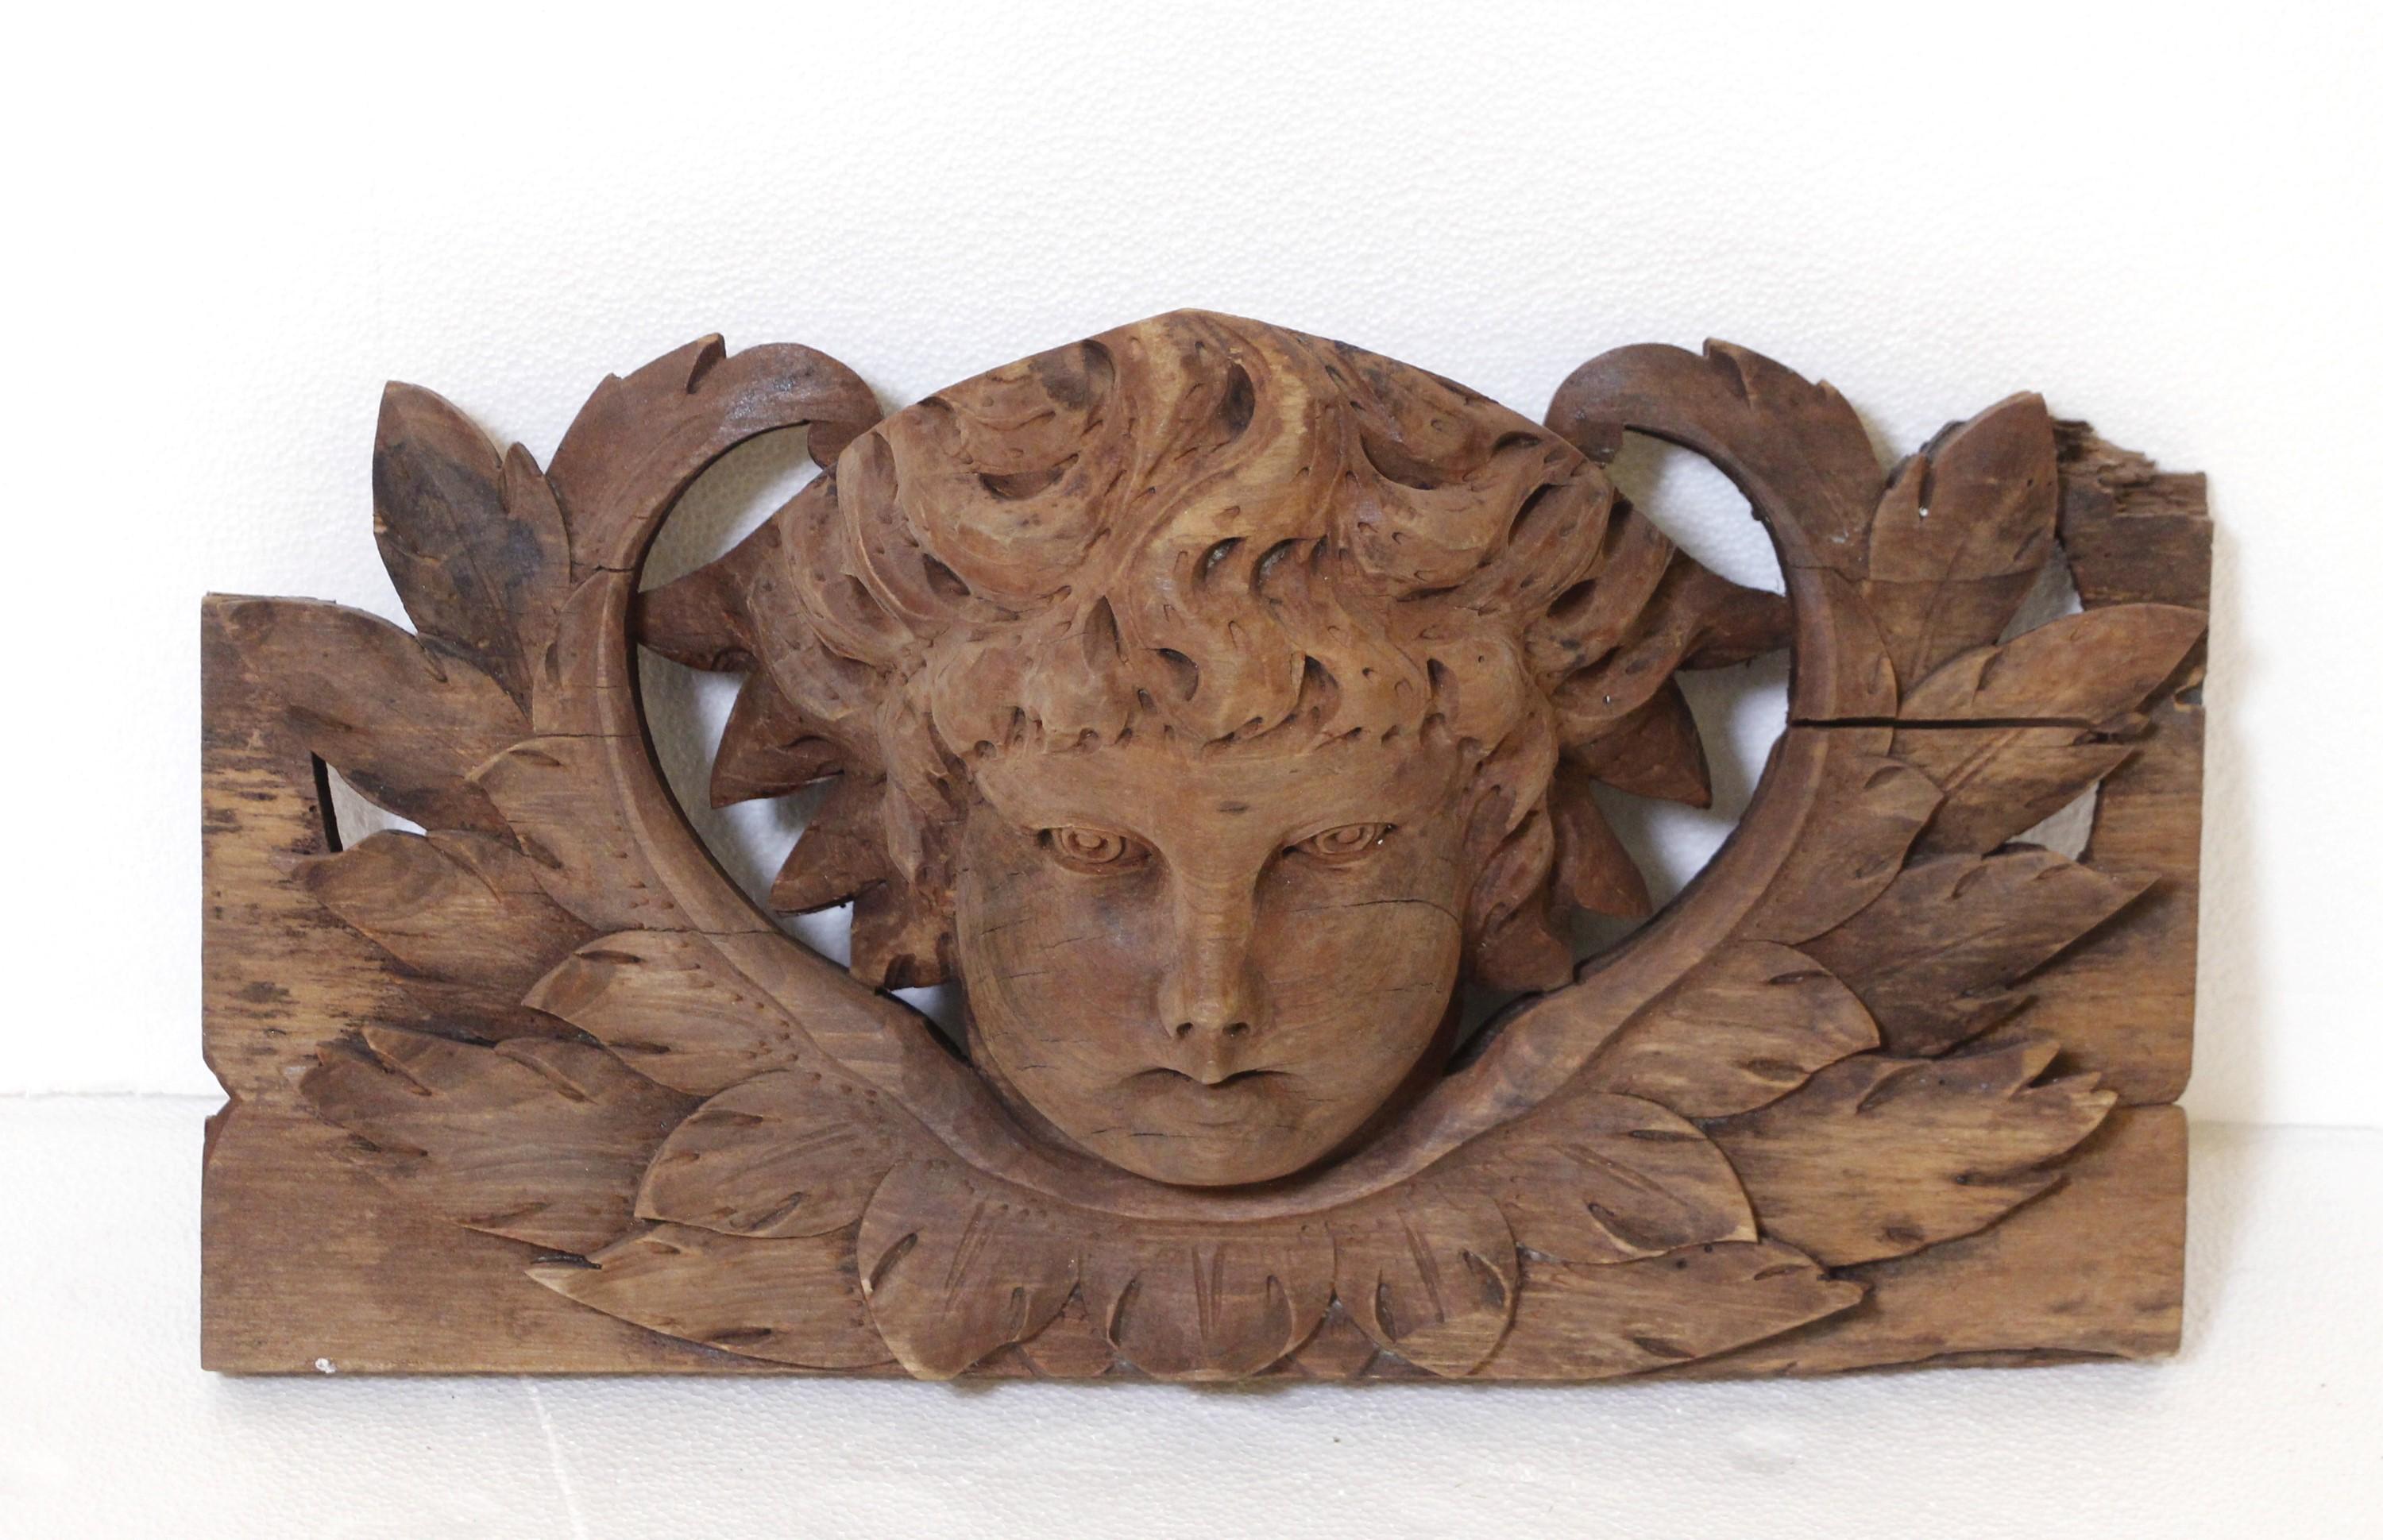 Antique hand carved angel cherub face, perhaps part of a door surround, from the early 1900s.  The craftsmanship on this piece is impeccable. There is a mounting bracket hanging on the back. Good condition with appropriate wear from age. Due to the